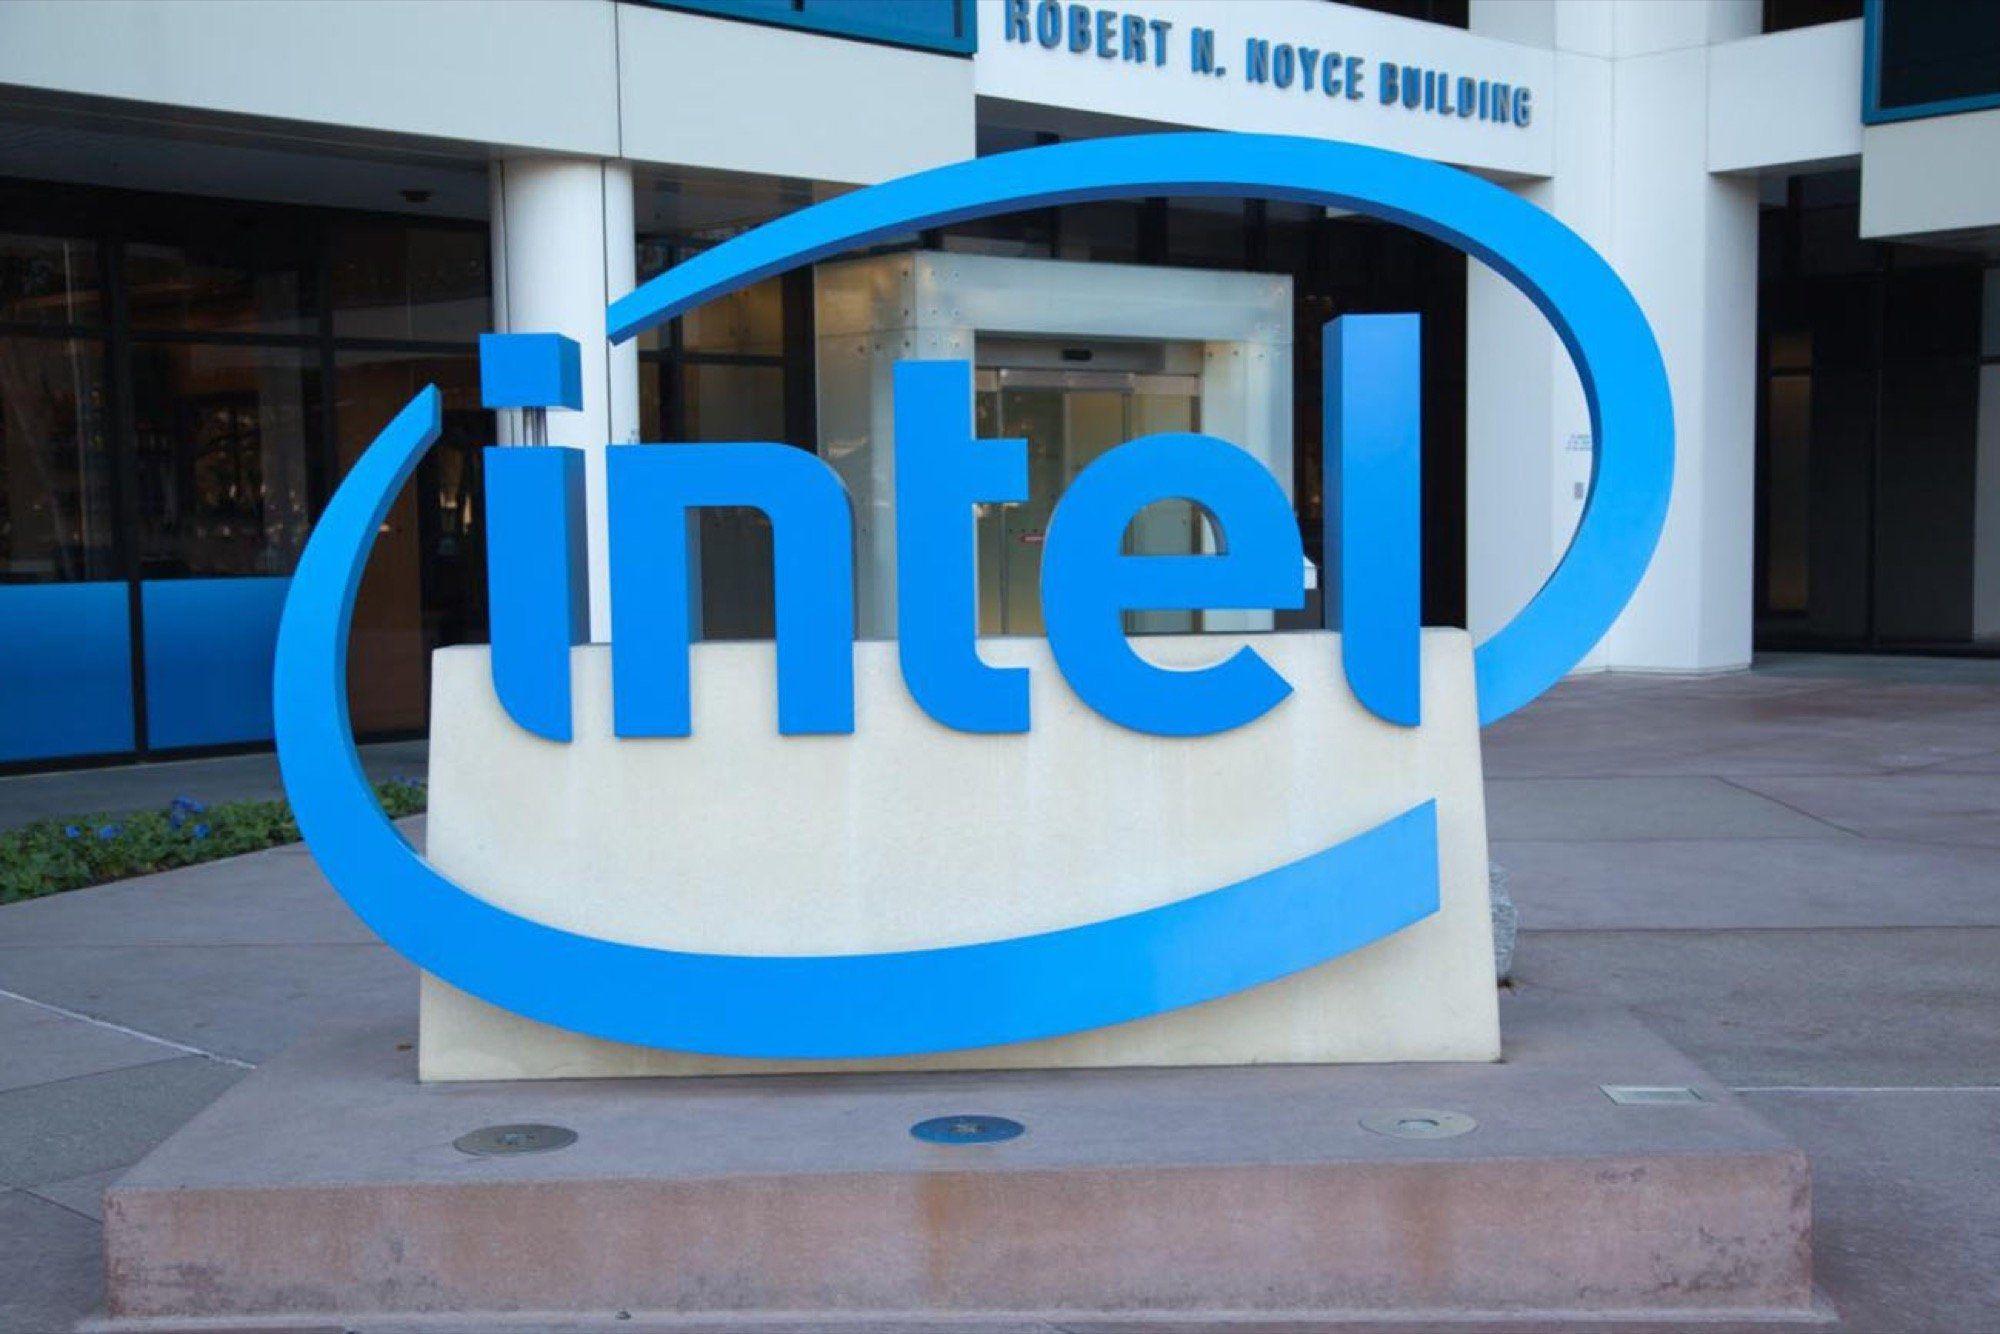 Building with Old Intel Logo - This 13 Year Old Entrepreneur Just Landed Funding From Intel